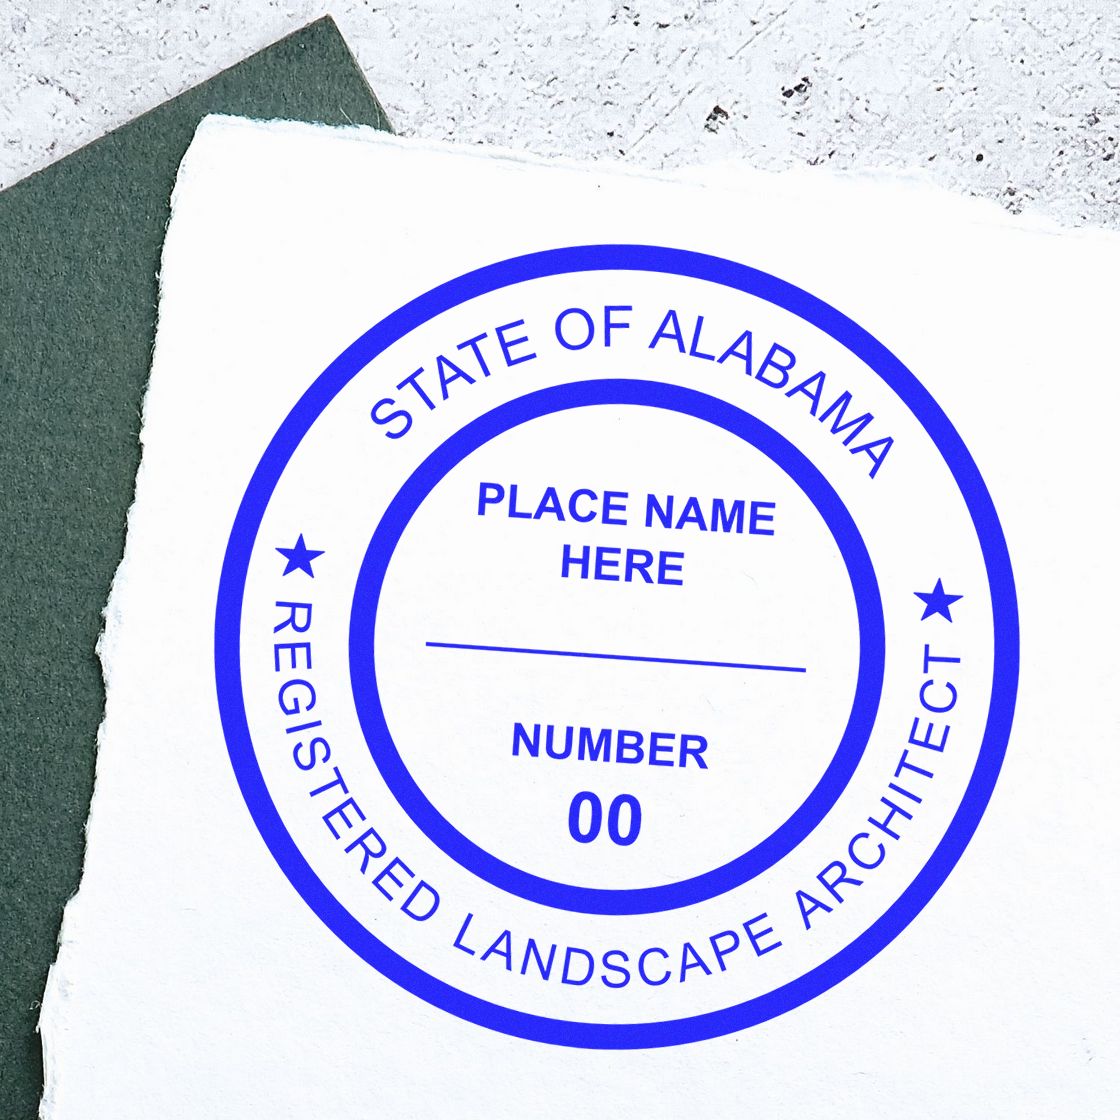 Another Example of a stamped impression of the Slim Pre-Inked Alabama Landscape Architect Seal Stamp on a piece of office paper.